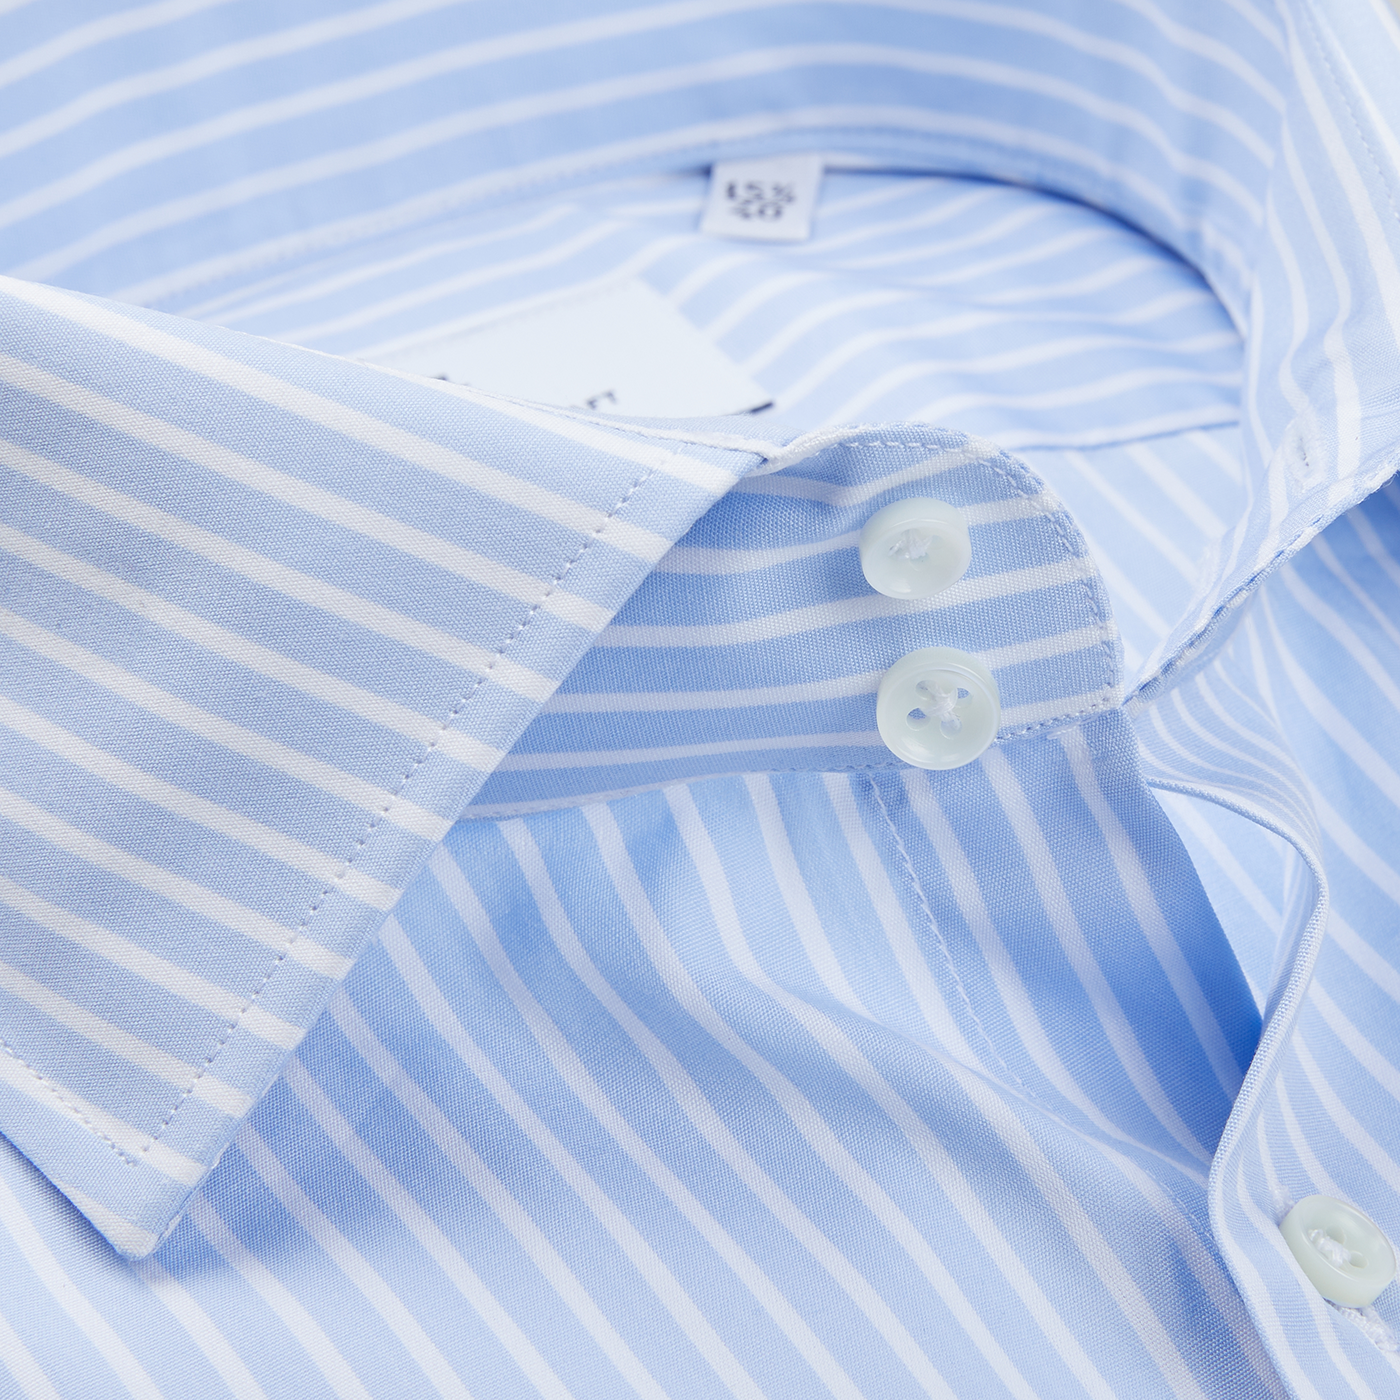 A close up of an Alexander Kraft Monte Carlo blue and white striped Egyptian cotton dress shirt, featuring mother-of-pearl buttons.